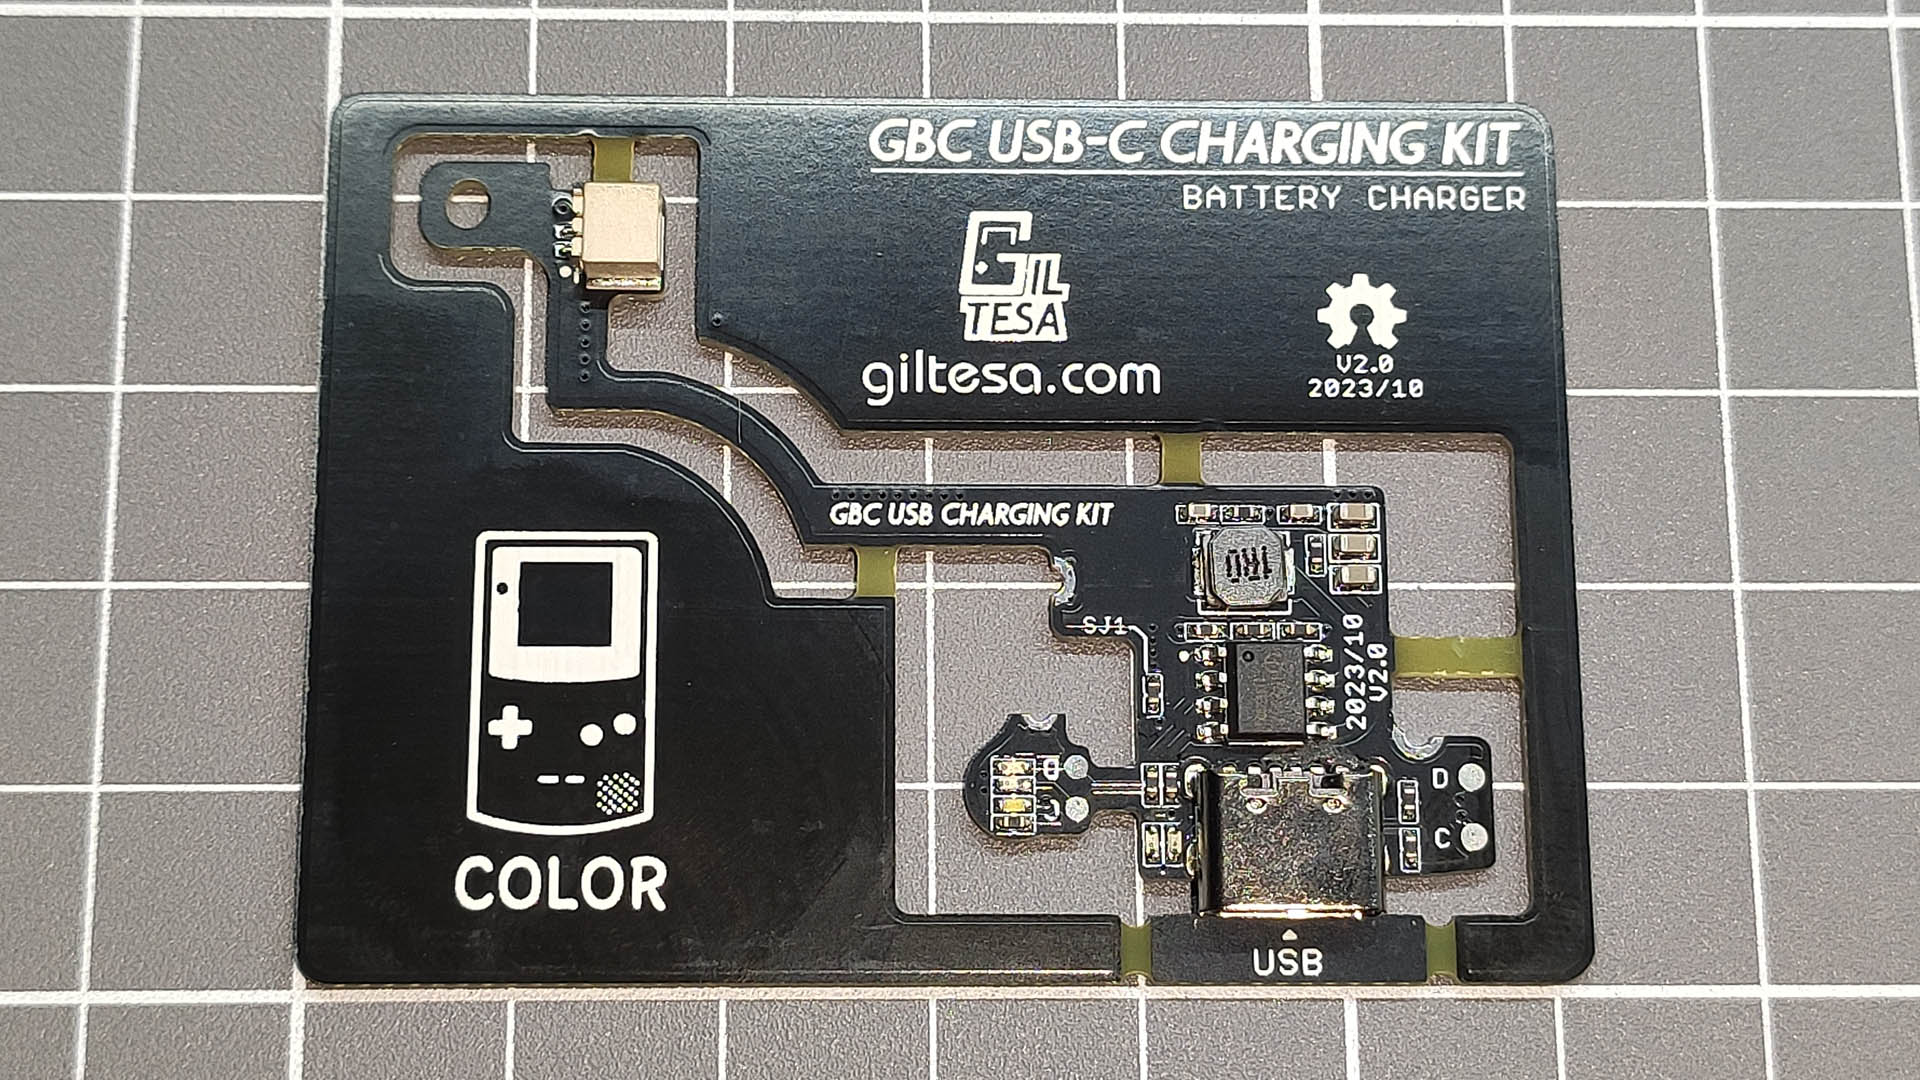 USB-C Charging Kit for Game Boy Color from The giltesa's shop on Tindie